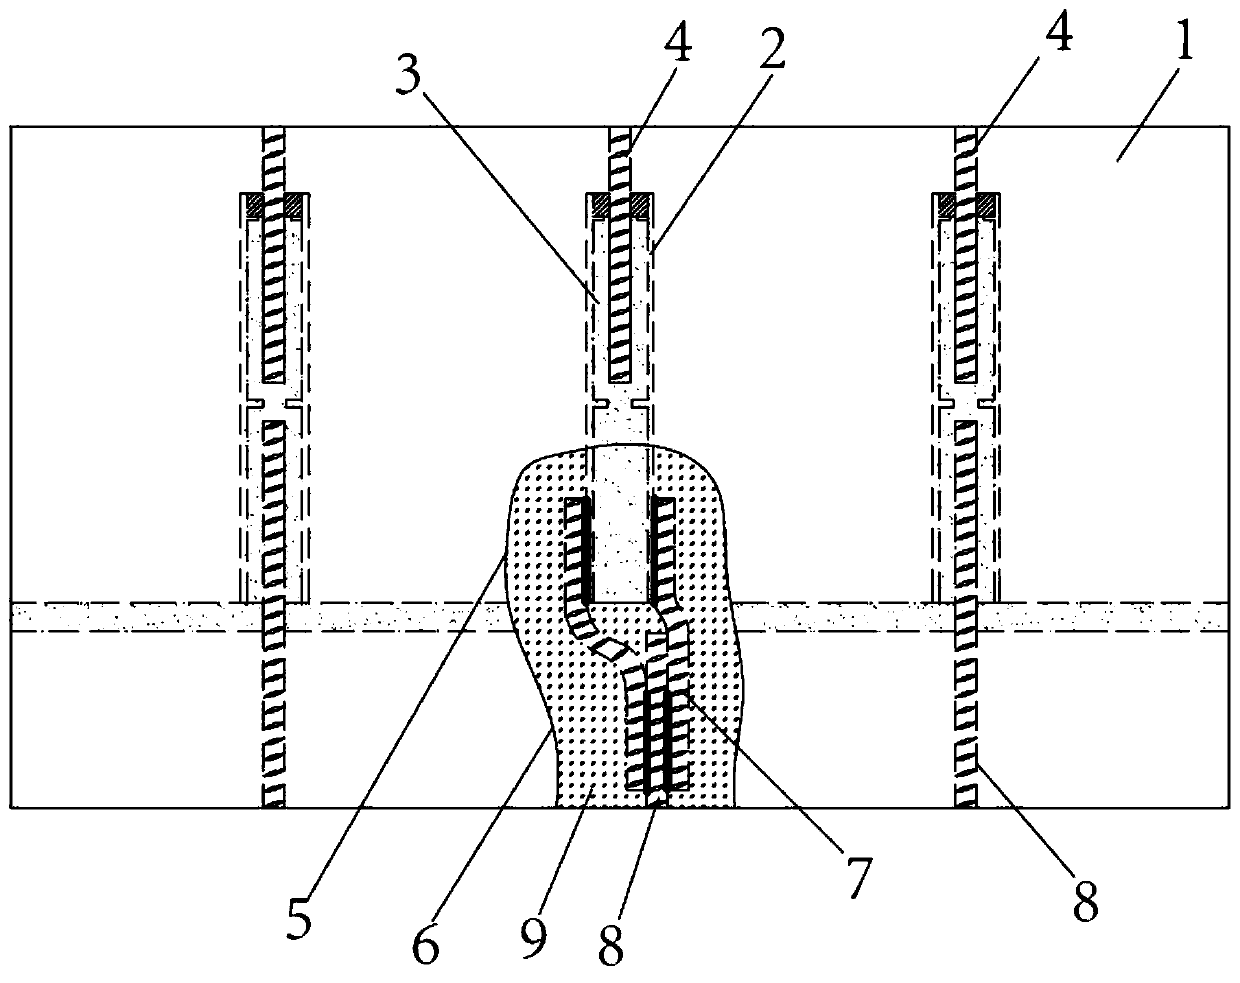 Reinforcing structure for truncation of connecting reinforcing steel bars in sleeves and construction method thereof